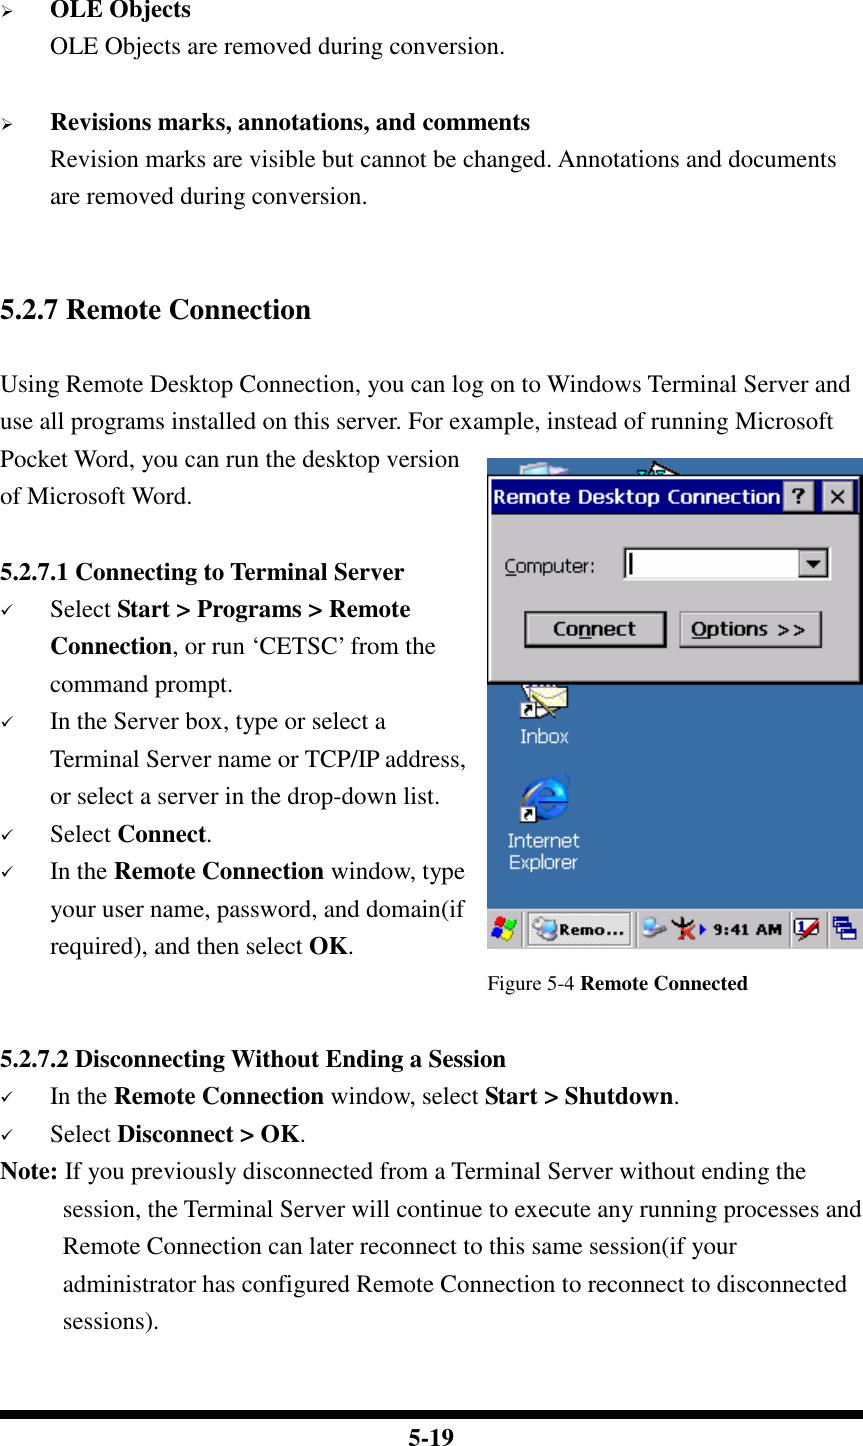  5-19   OLE Objects OLE Objects are removed during conversion.   Revisions marks, annotations, and comments Revision marks are visible but cannot be changed. Annotations and documents are removed during conversion.   5.2.7 Remote Connection  Using Remote Desktop Connection, you can log on to Windows Terminal Server and use all programs installed on this server. For example, instead of running Microsoft Pocket Word, you can run the desktop version of Microsoft Word.  5.2.7.1 Connecting to Terminal Server  Select Start &gt; Programs &gt; Remote Connection, or run ‘CETSC’ from the command prompt.  In the Server box, type or select a Terminal Server name or TCP/IP address, or select a server in the drop-down list.  Select Connect.  In the Remote Connection window, type your user name, password, and domain(if required), and then select OK.                                        Figure 5-4 Remote Connected  5.2.7.2 Disconnecting Without Ending a Session  In the Remote Connection window, select Start &gt; Shutdown.  Select Disconnect &gt; OK. Note: If you previously disconnected from a Terminal Server without ending the session, the Terminal Server will continue to execute any running processes and Remote Connection can later reconnect to this same session(if your administrator has configured Remote Connection to reconnect to disconnected sessions).  